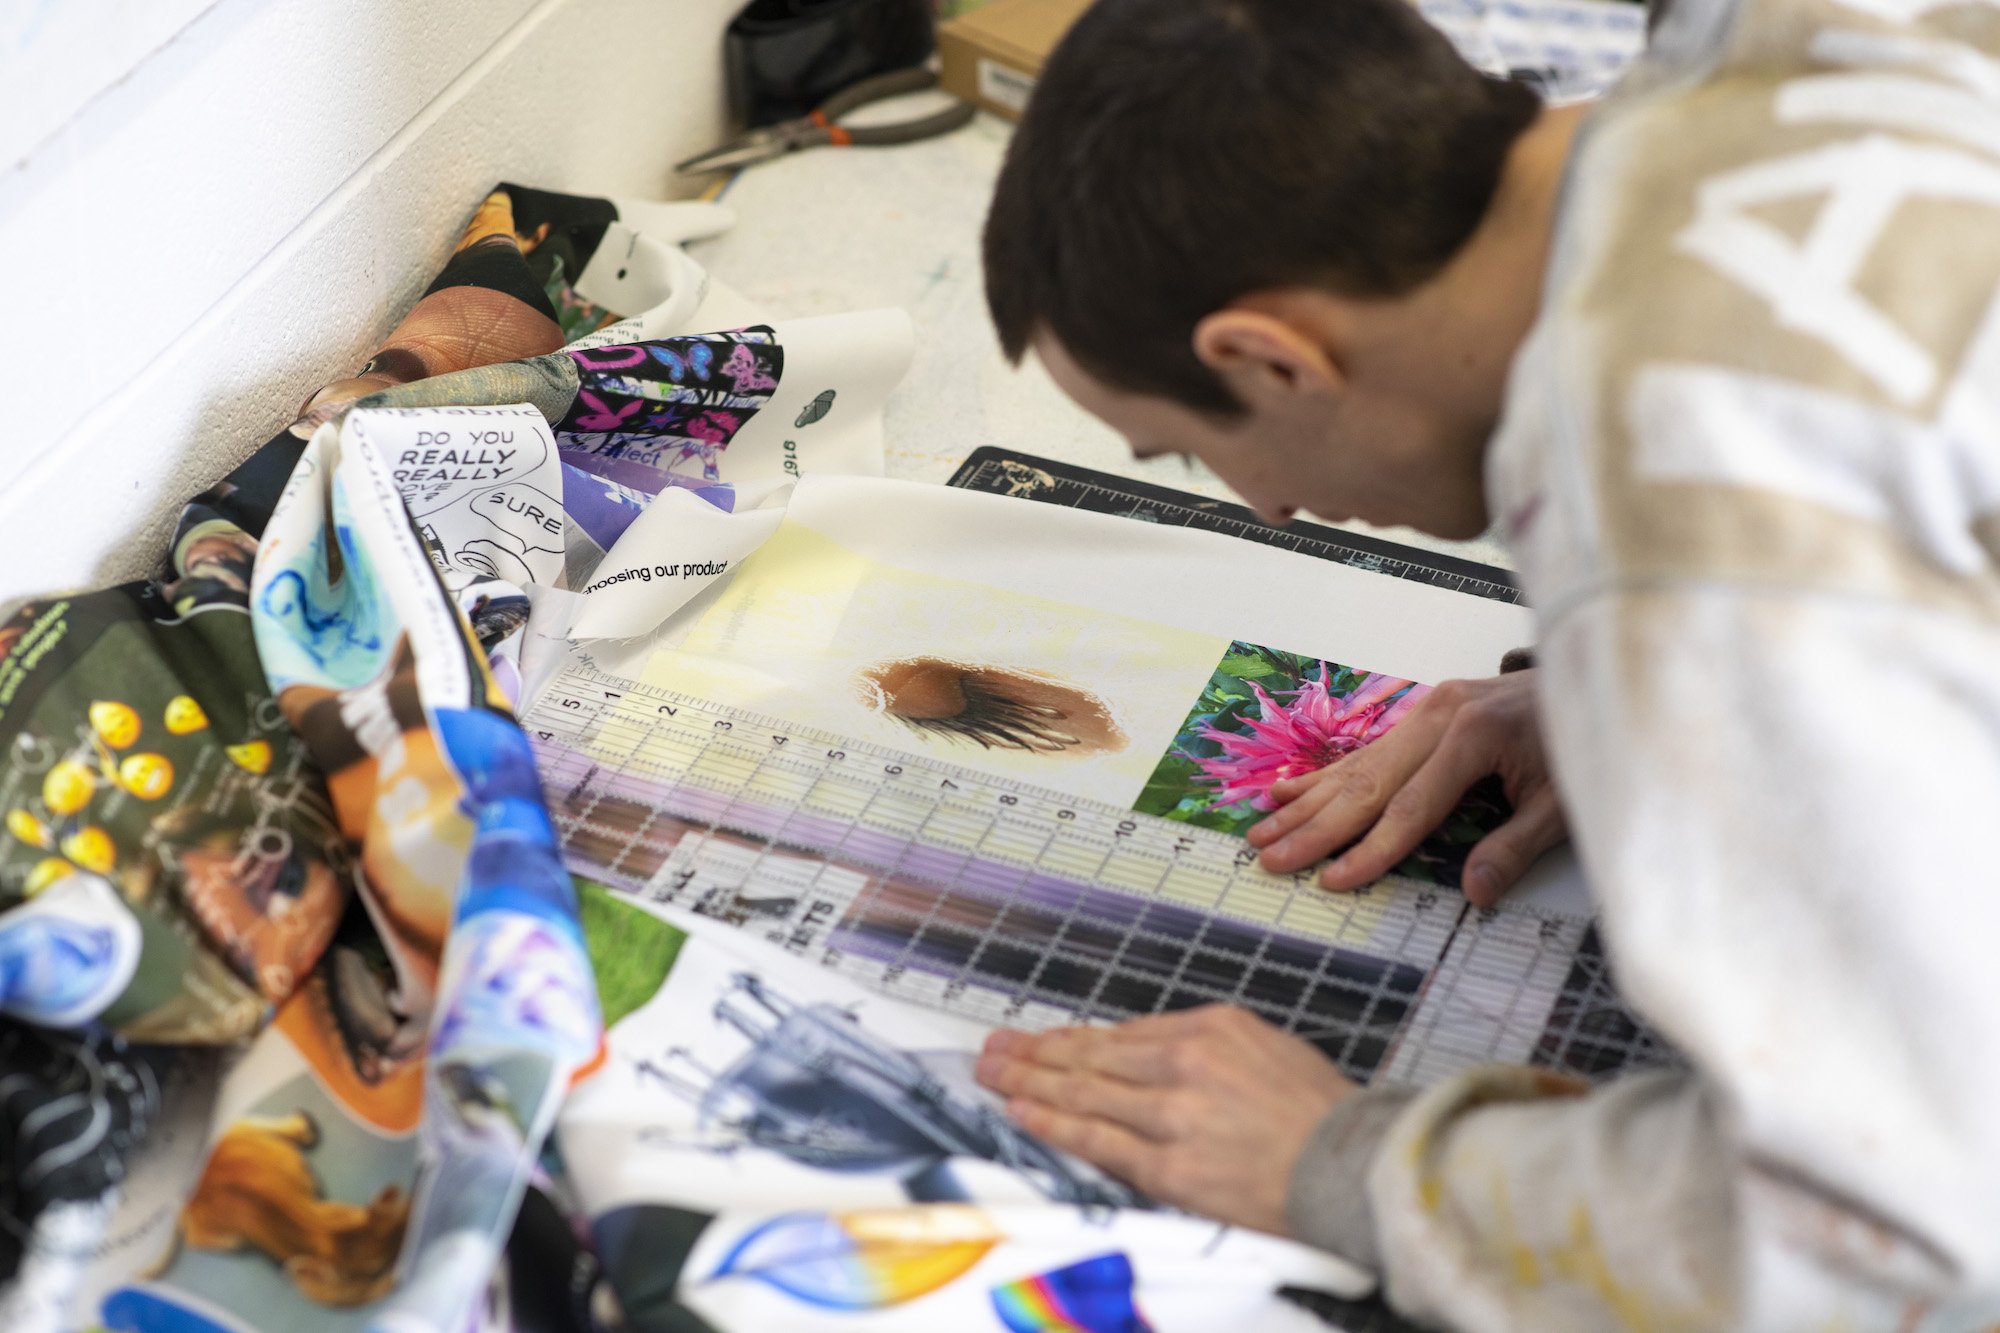 A man with dark hair leans over a desk as he places a ruler next to some pictures surrounded by scraps of fabric.